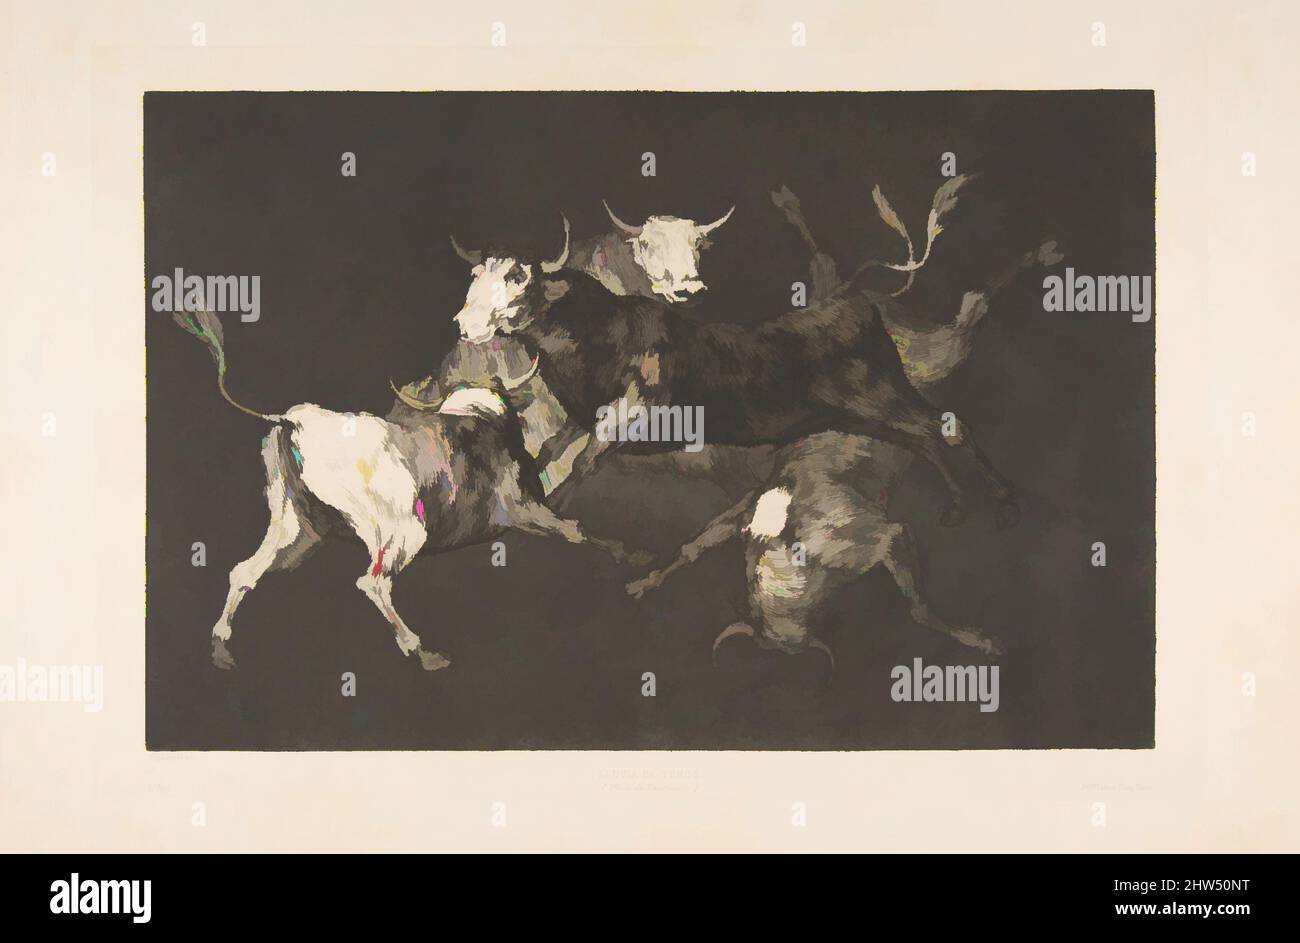 Art inspired by Plate D from the 'Disparates': Fools-'or Little Bulls' - folly, ca. 1816–23 (published 1877), Etching, aquatint and drypoint, Plate: 9 5/8 × 13 3/4 in. (24.5 × 35 cm), Prints, Goya (Francisco de Goya y Lucientes) (Spanish, Fuendetodos 1746–1828 Bordeaux), One of the, Classic works modernized by Artotop with a splash of modernity. Shapes, color and value, eye-catching visual impact on art. Emotions through freedom of artworks in a contemporary way. A timeless message pursuing a wildly creative new direction. Artists turning to the digital medium and creating the Artotop NFT Stock Photo